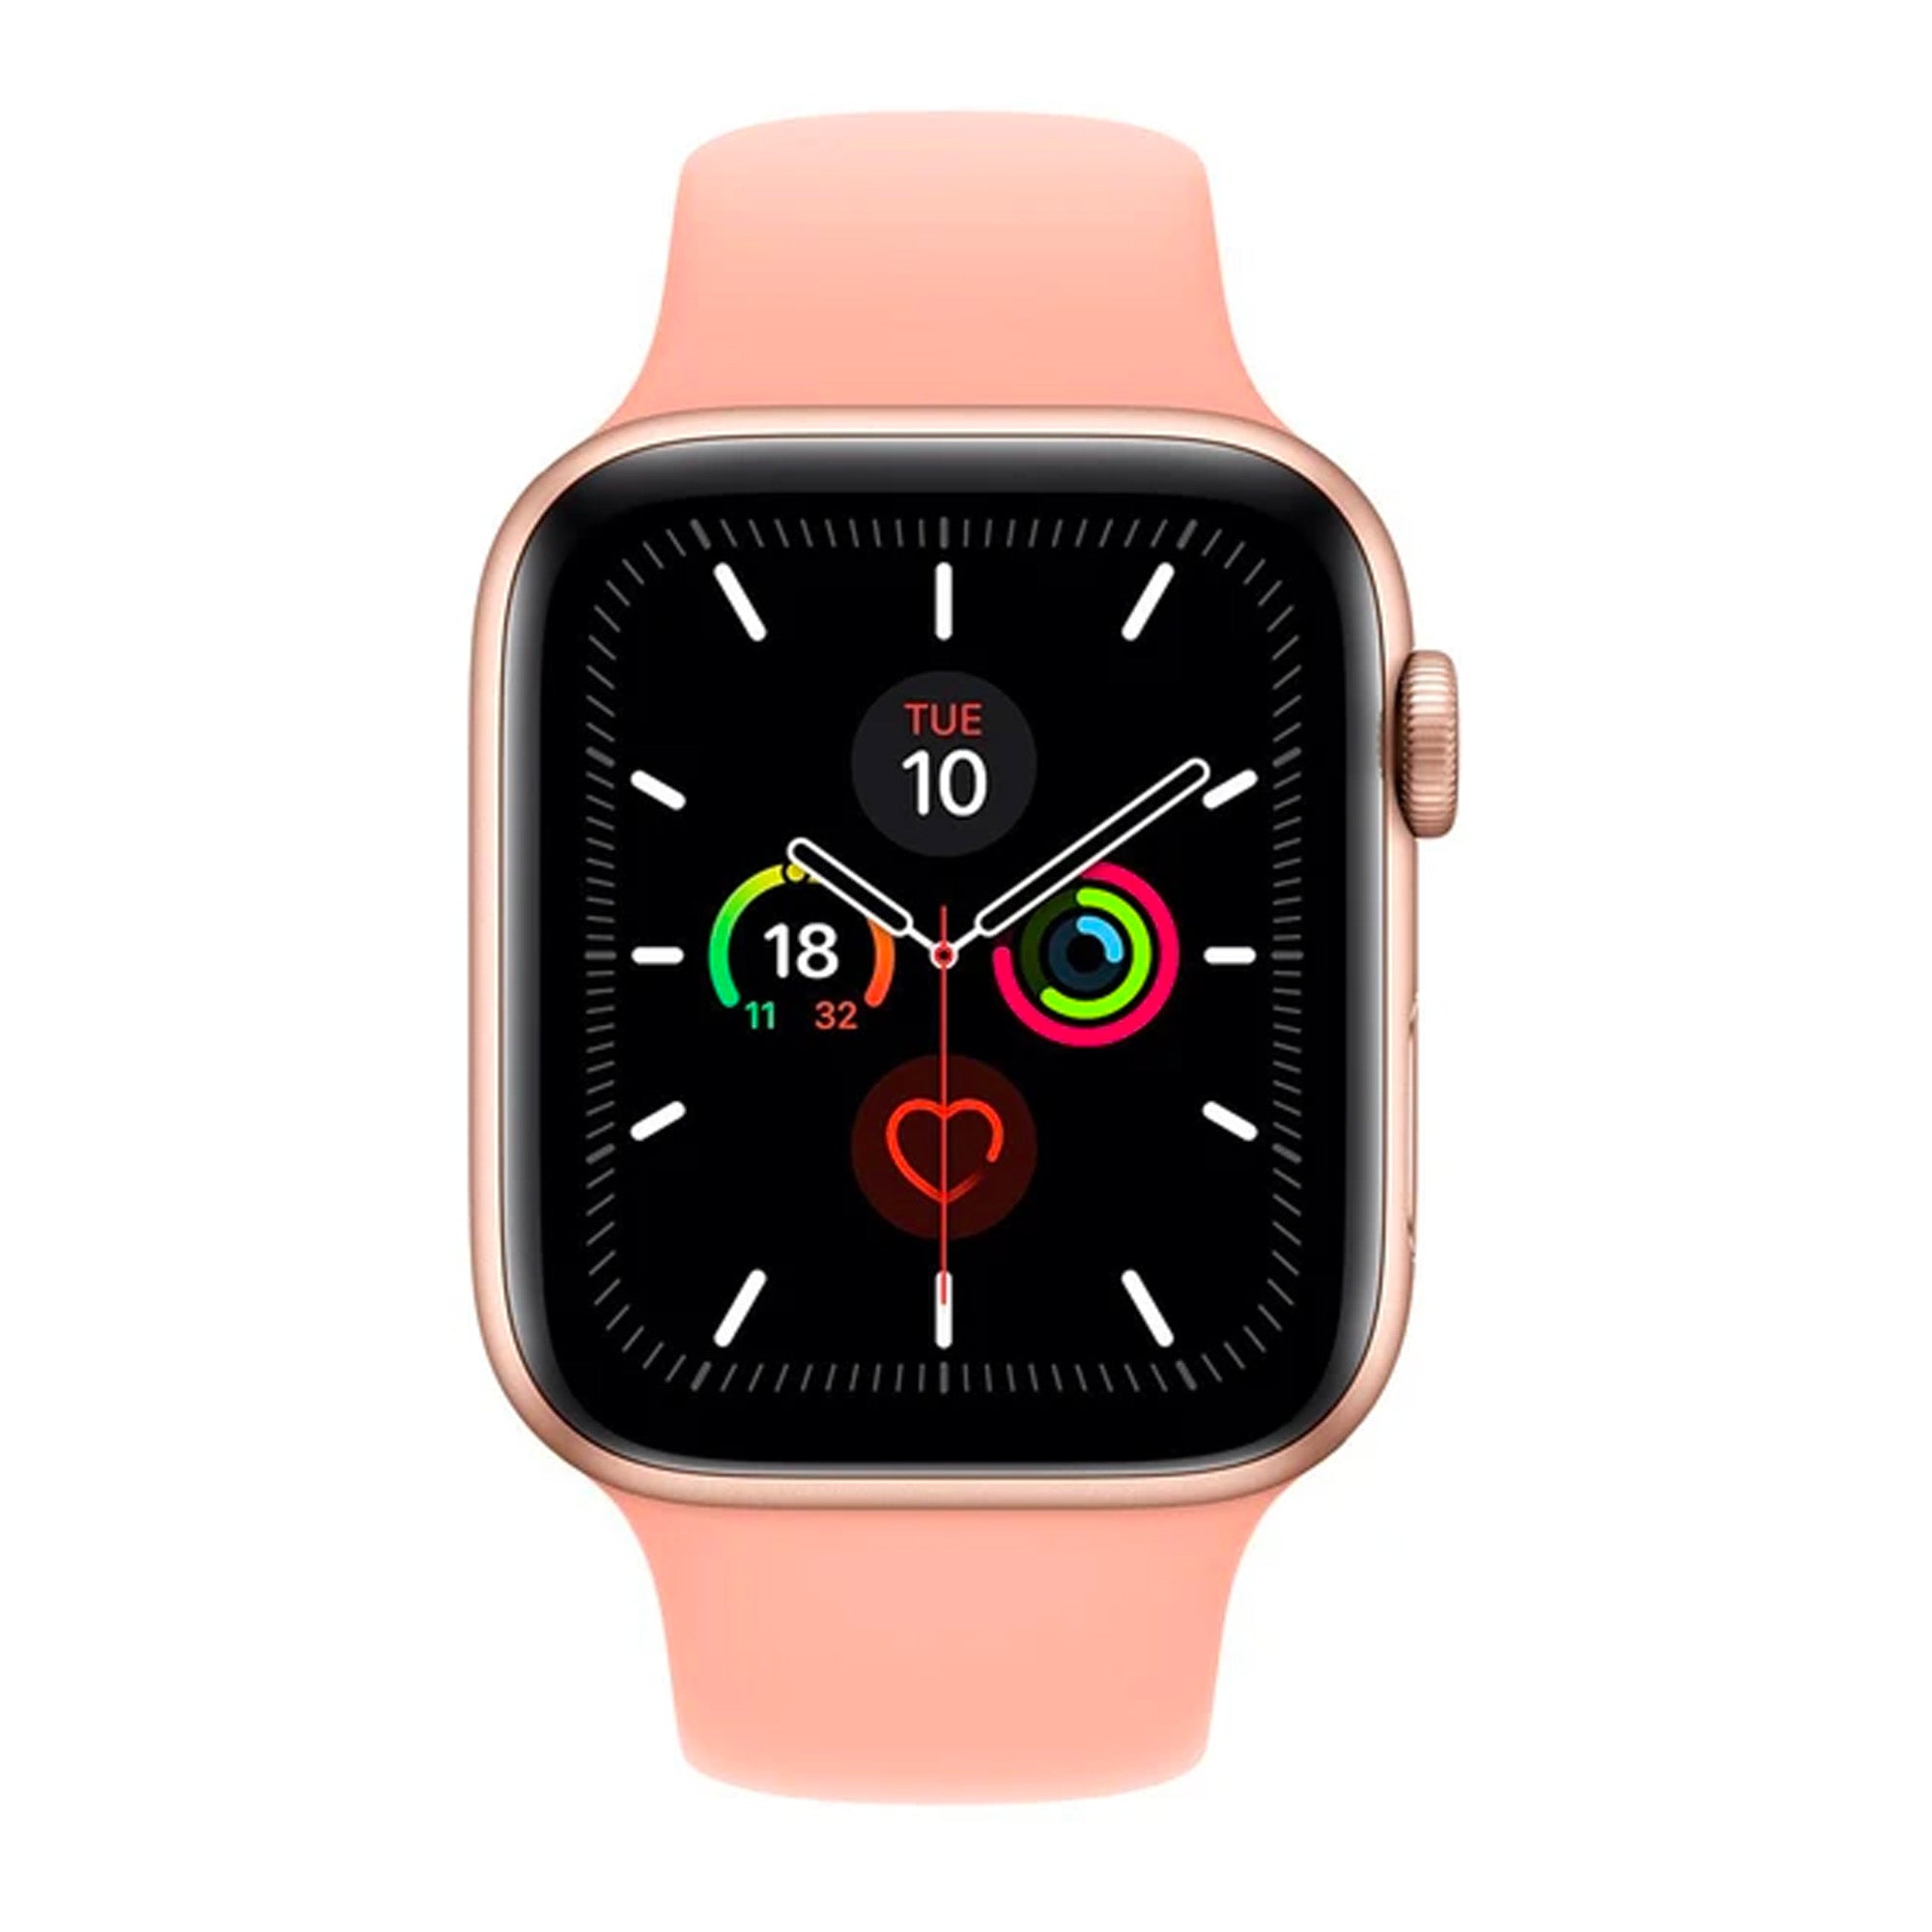 Grapefruit Silicone Band for Apple Watch Silicone Bands   Accessories Gifts UK